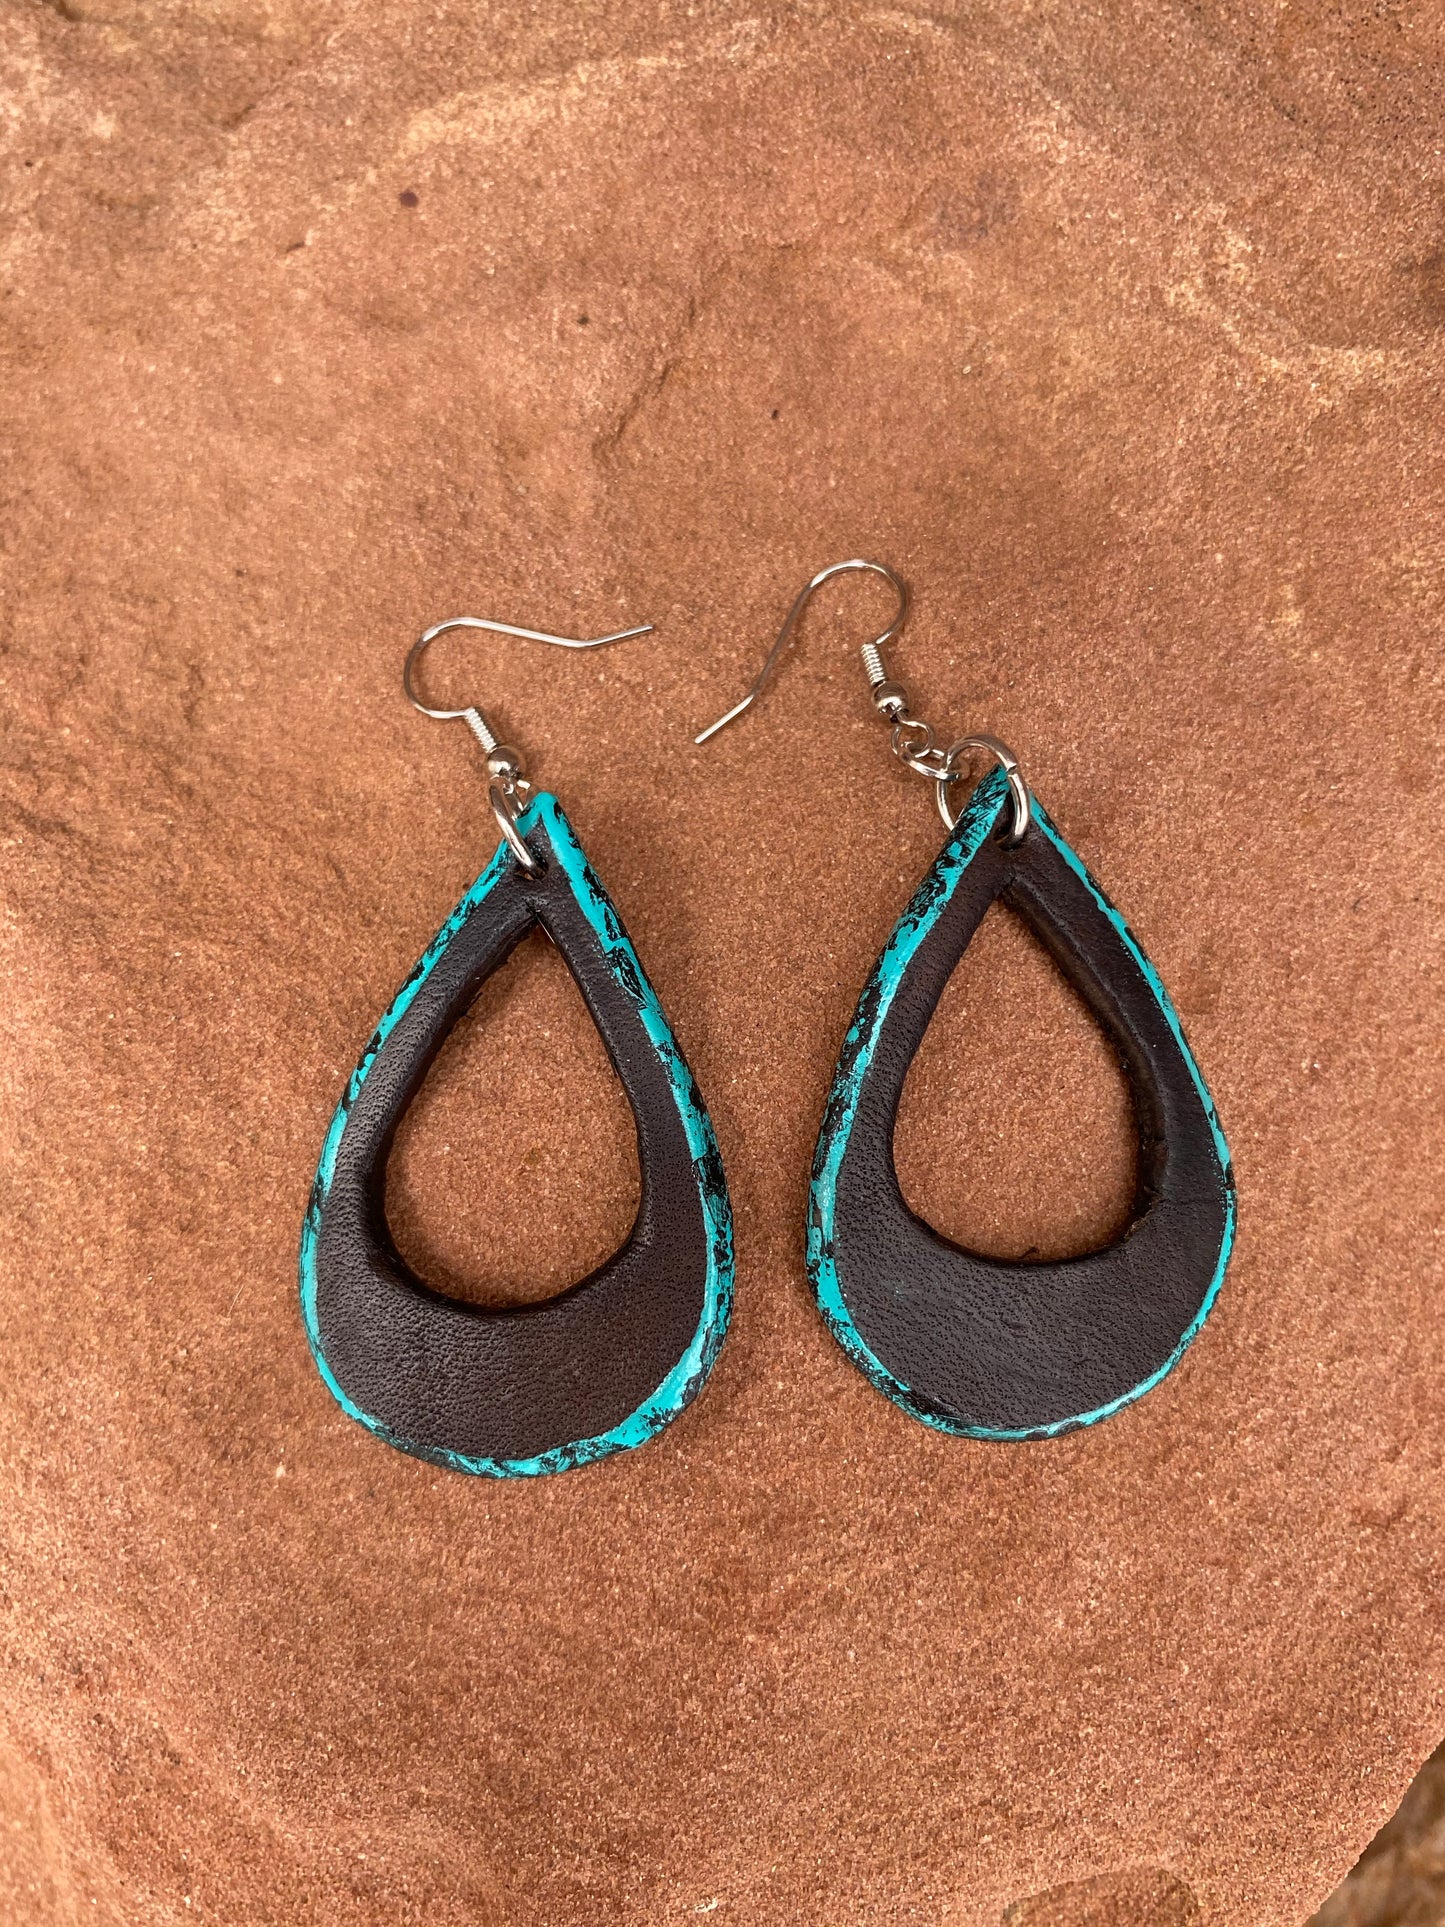 Turquoise Edge Teardrop Earrings with a surprise